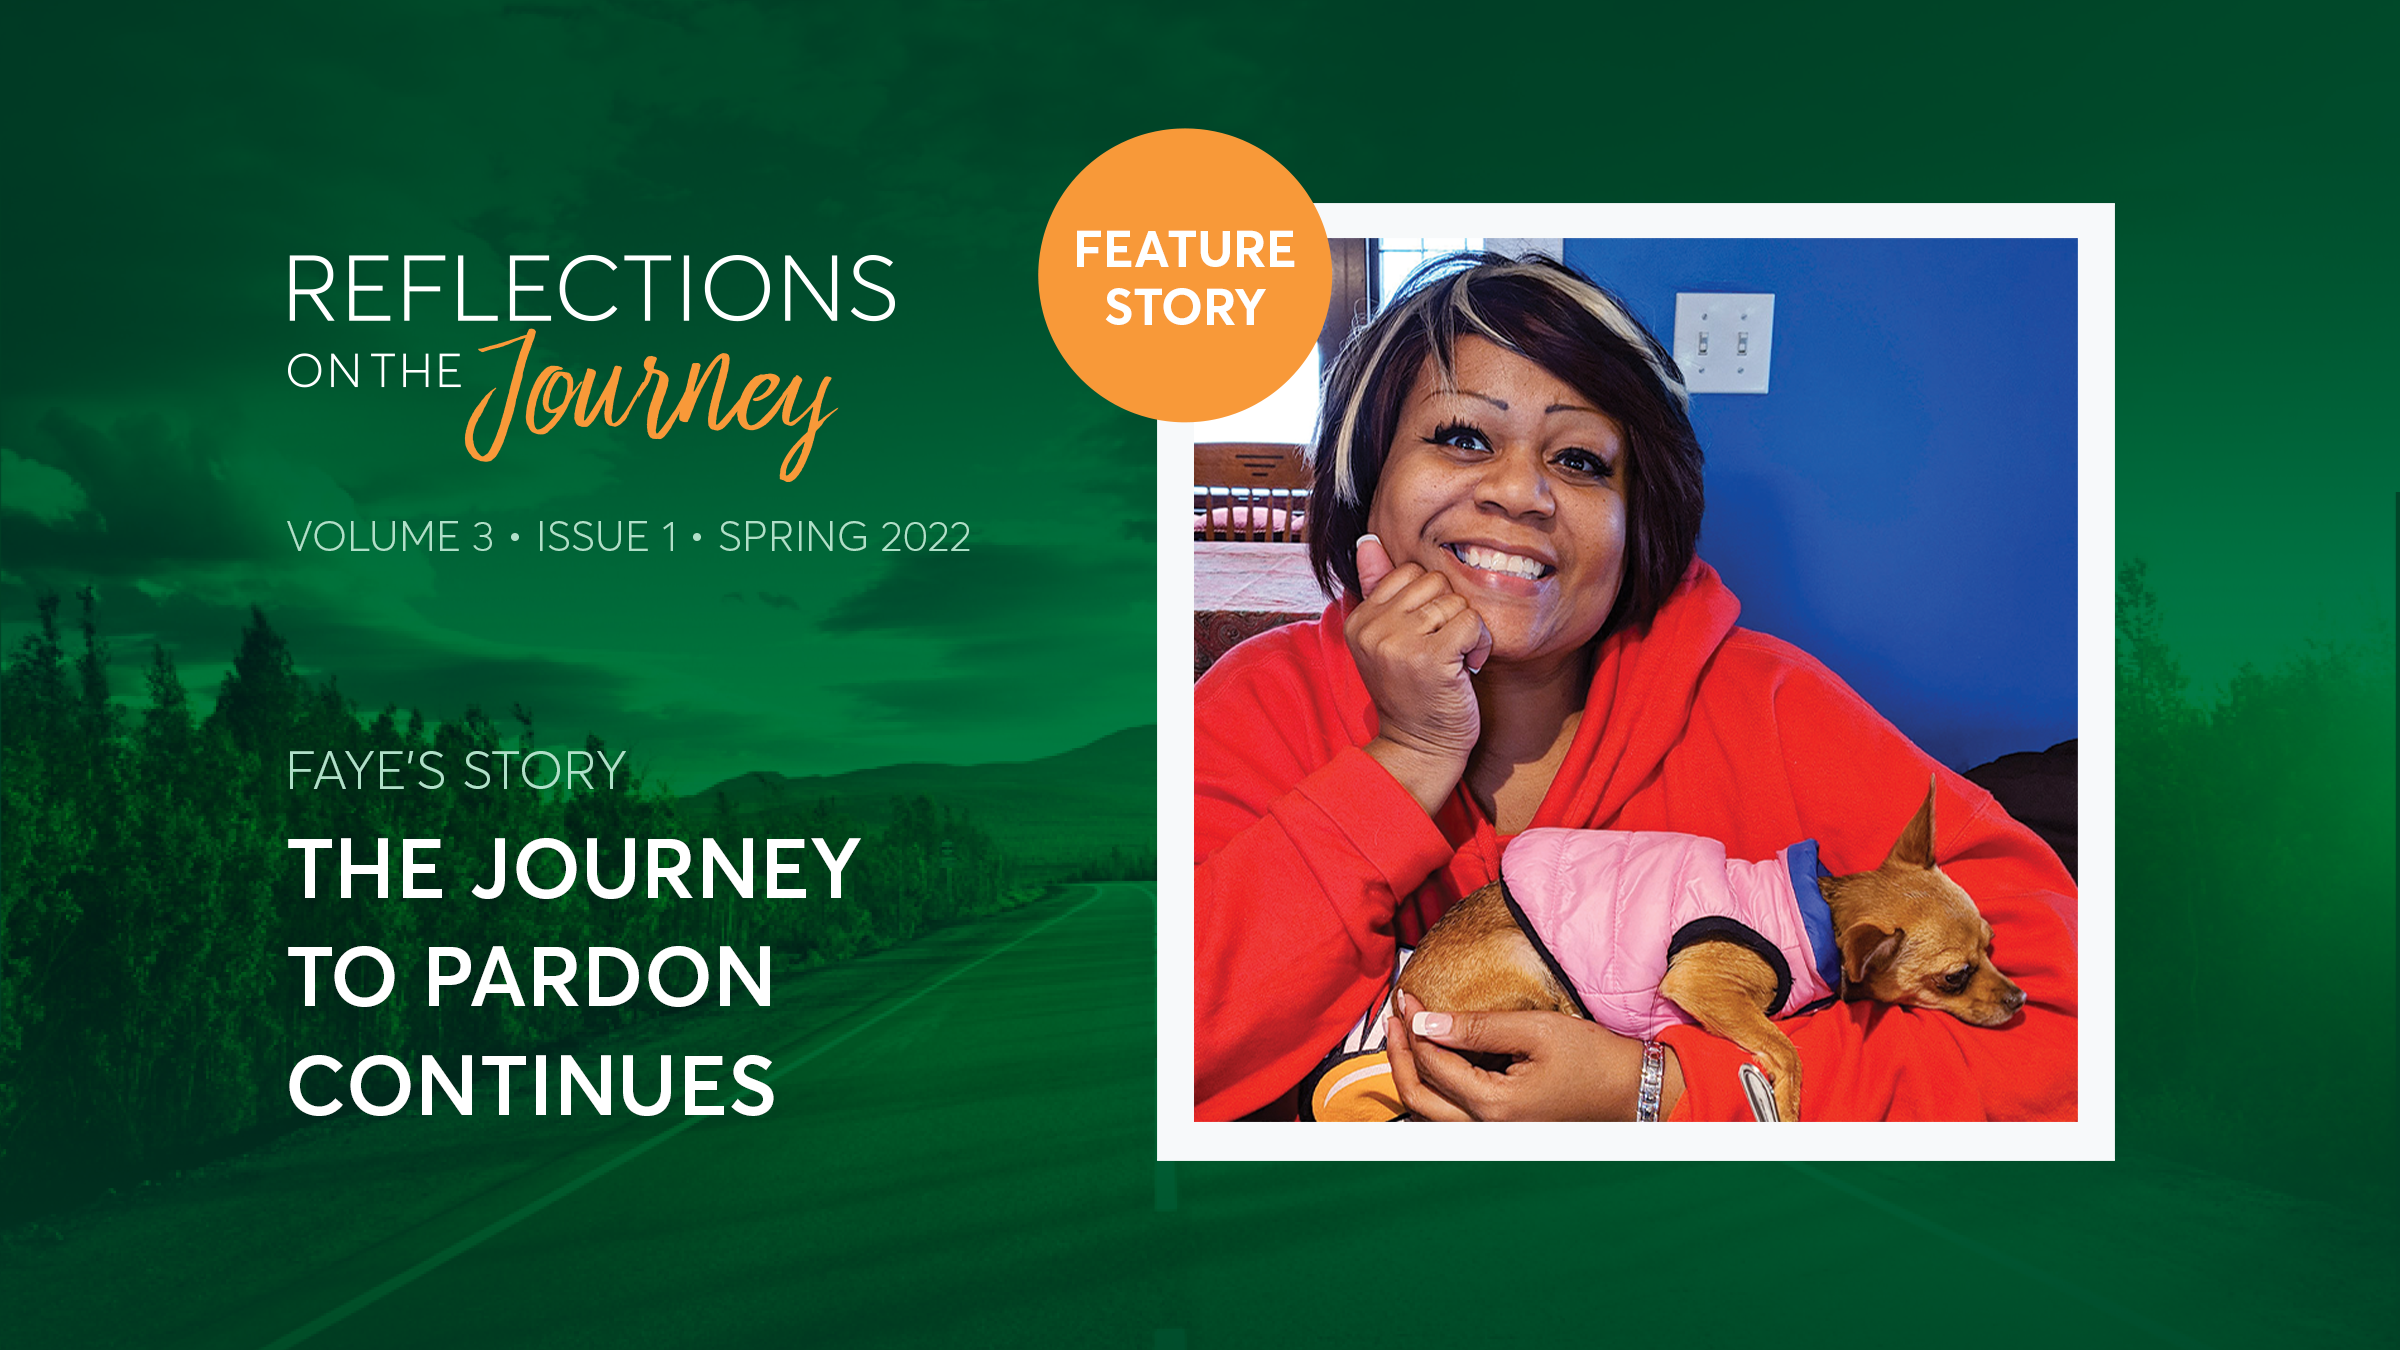 Spring 2022 • Reflections on the Journey • Faye's Story: The Journey to Pardon Continues